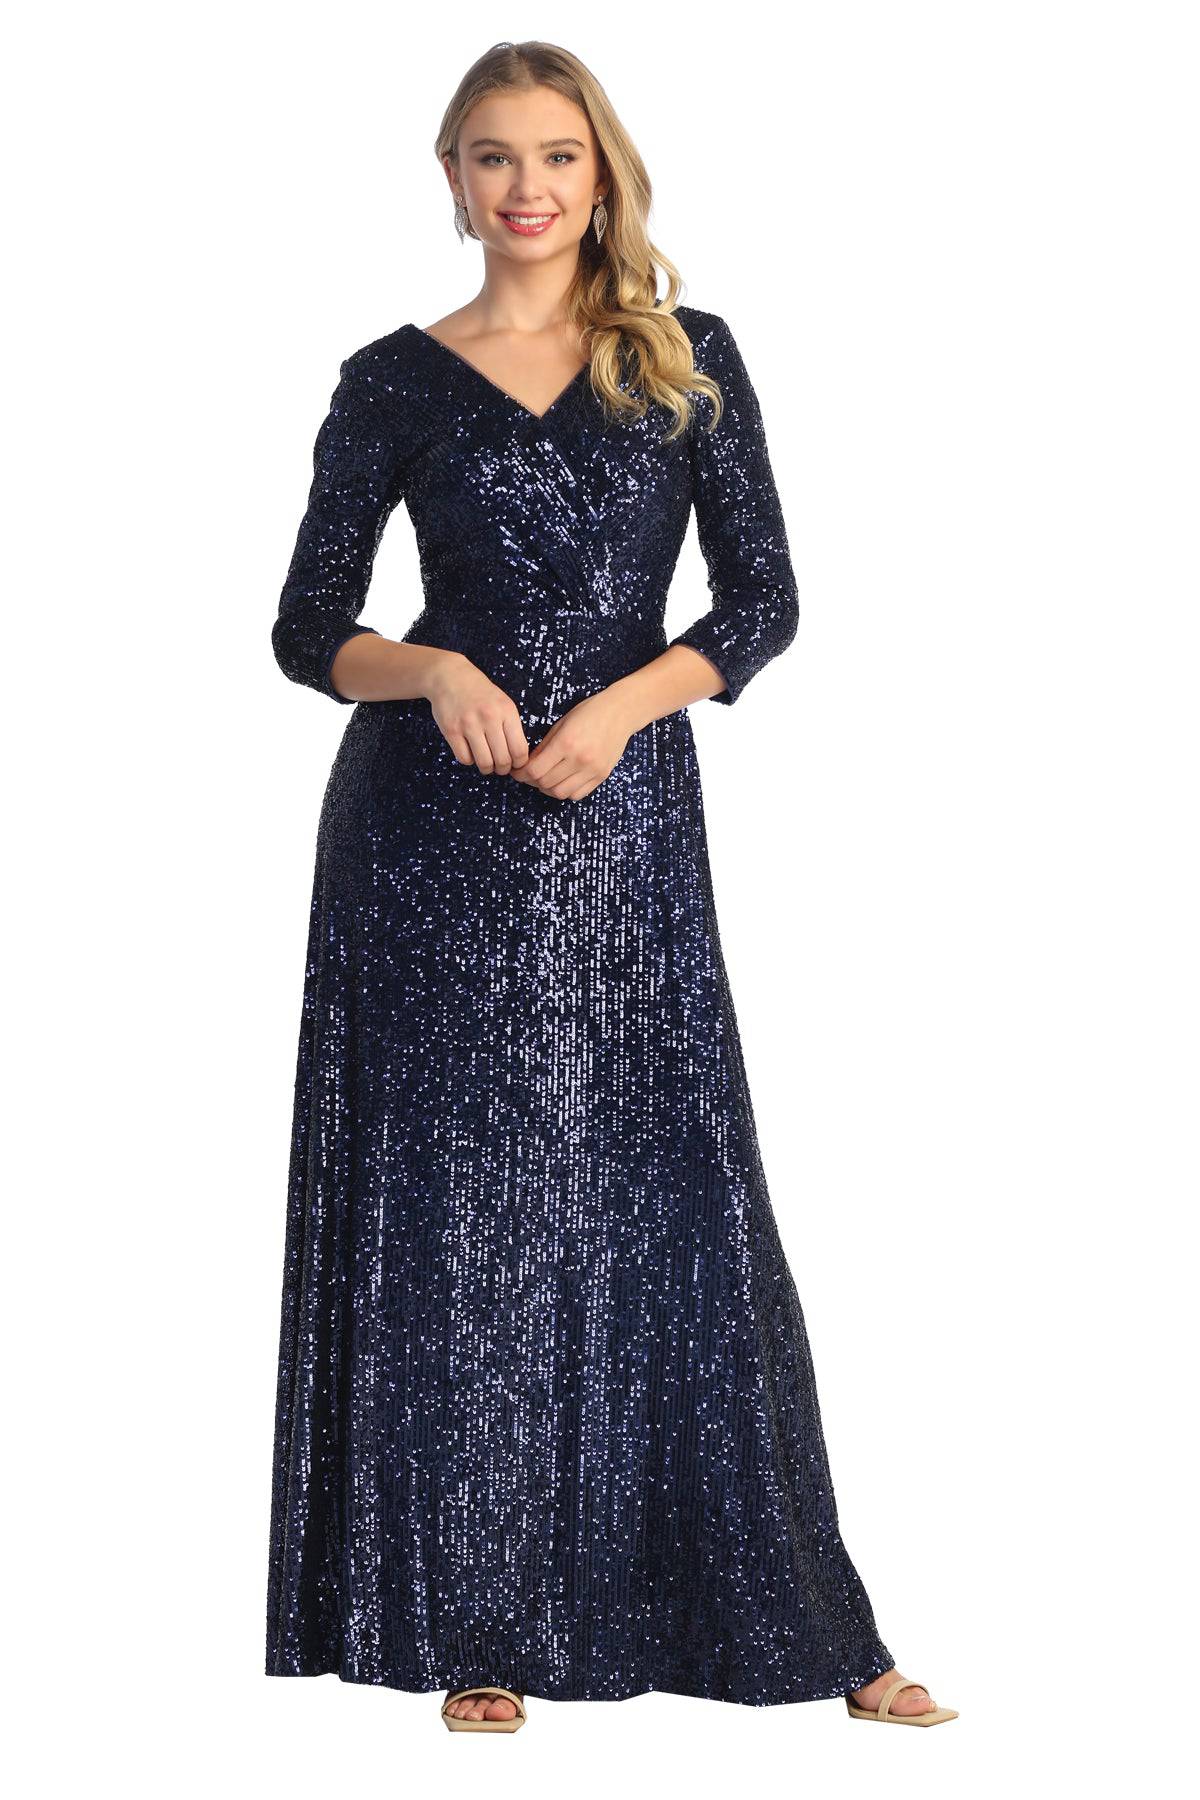 Cindy Collection 1731 Sparkling Dress with Sleeves - NORMA REED